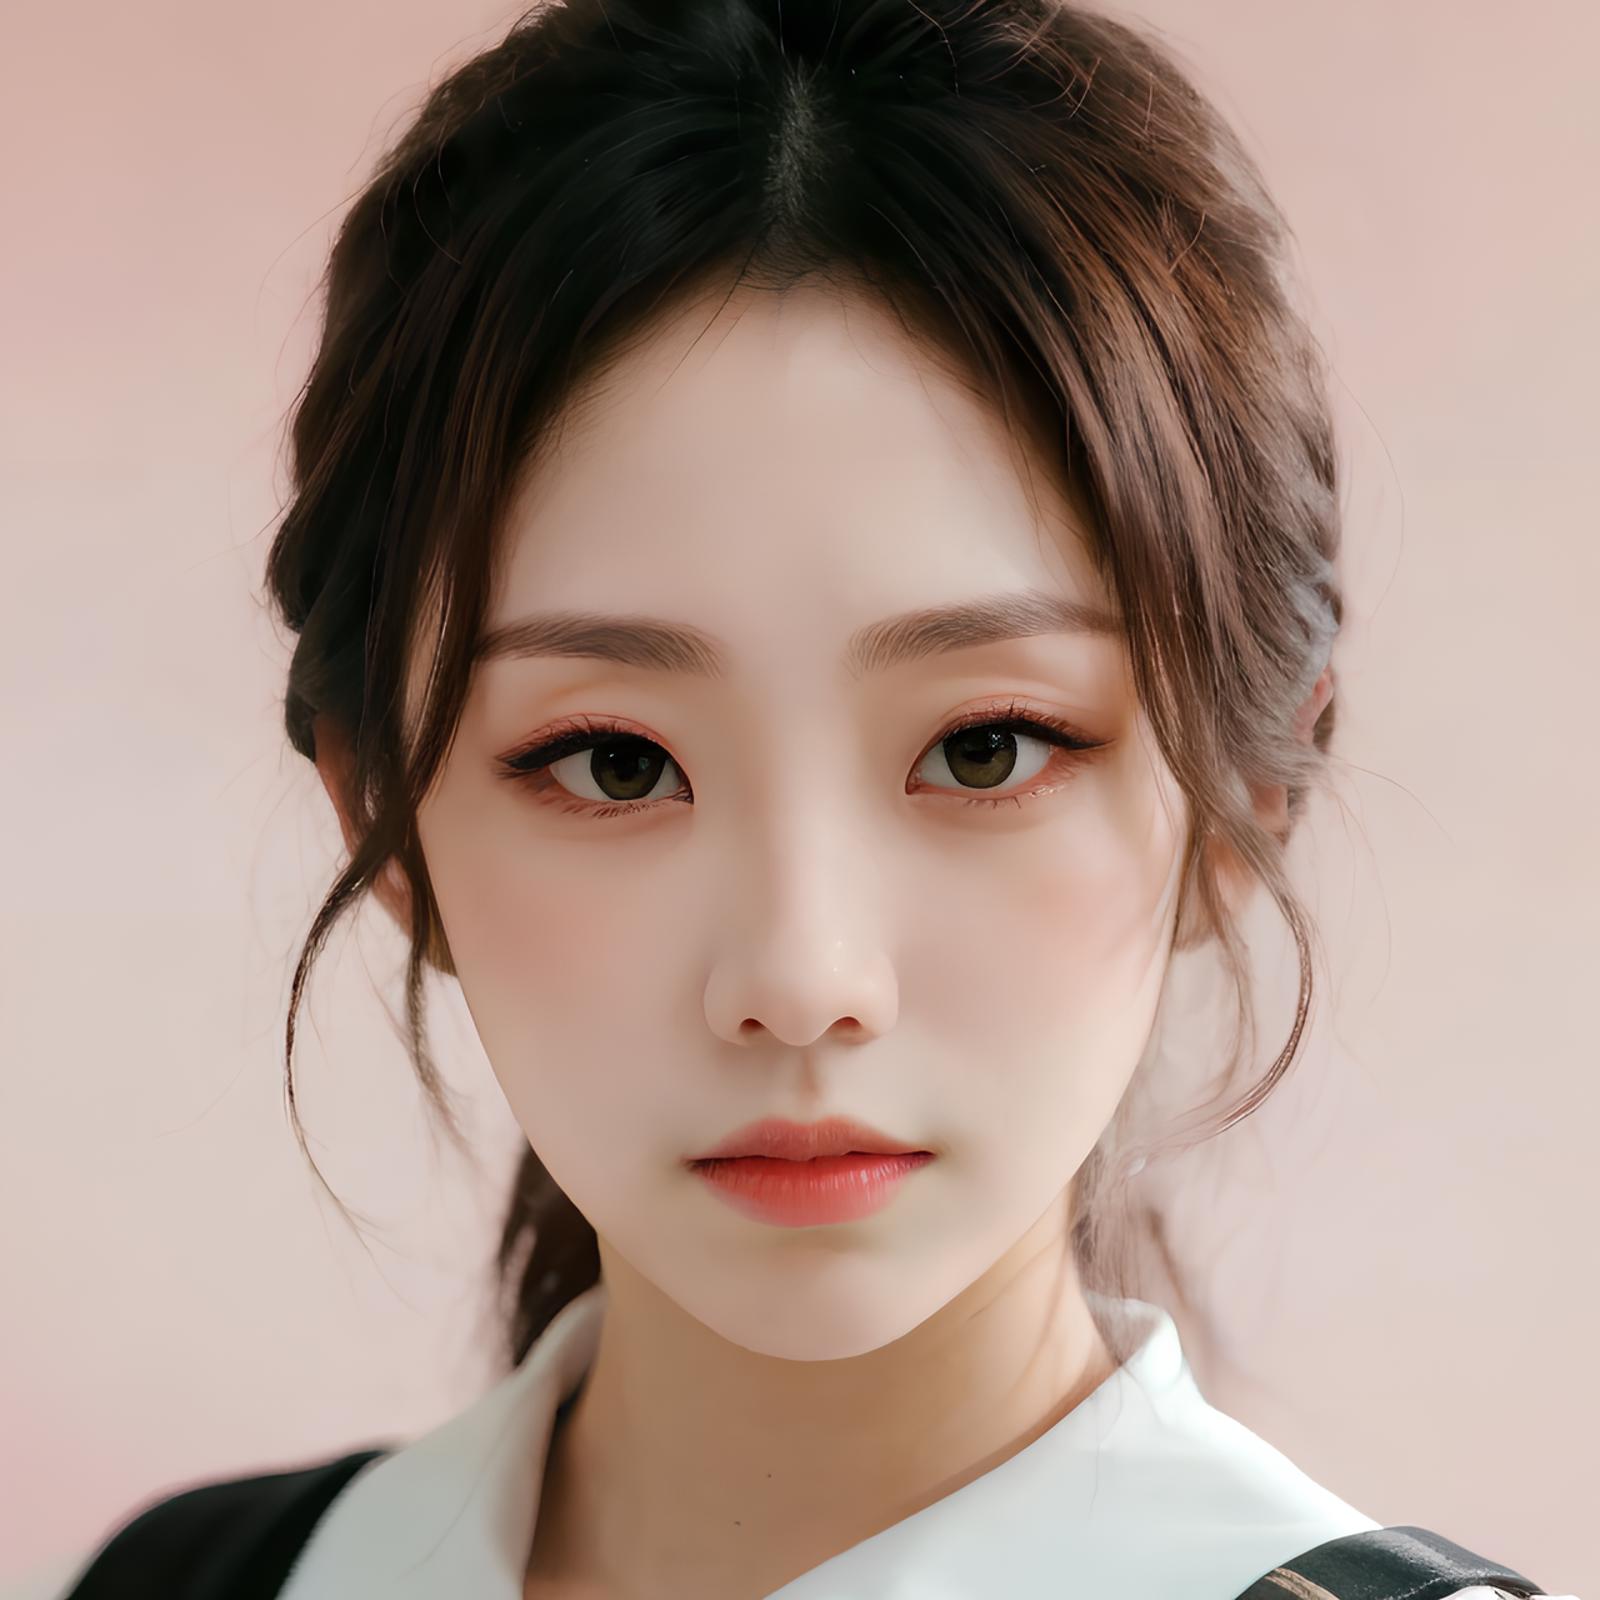 Not Lovelyz - Jisoo image by Tissue_AI